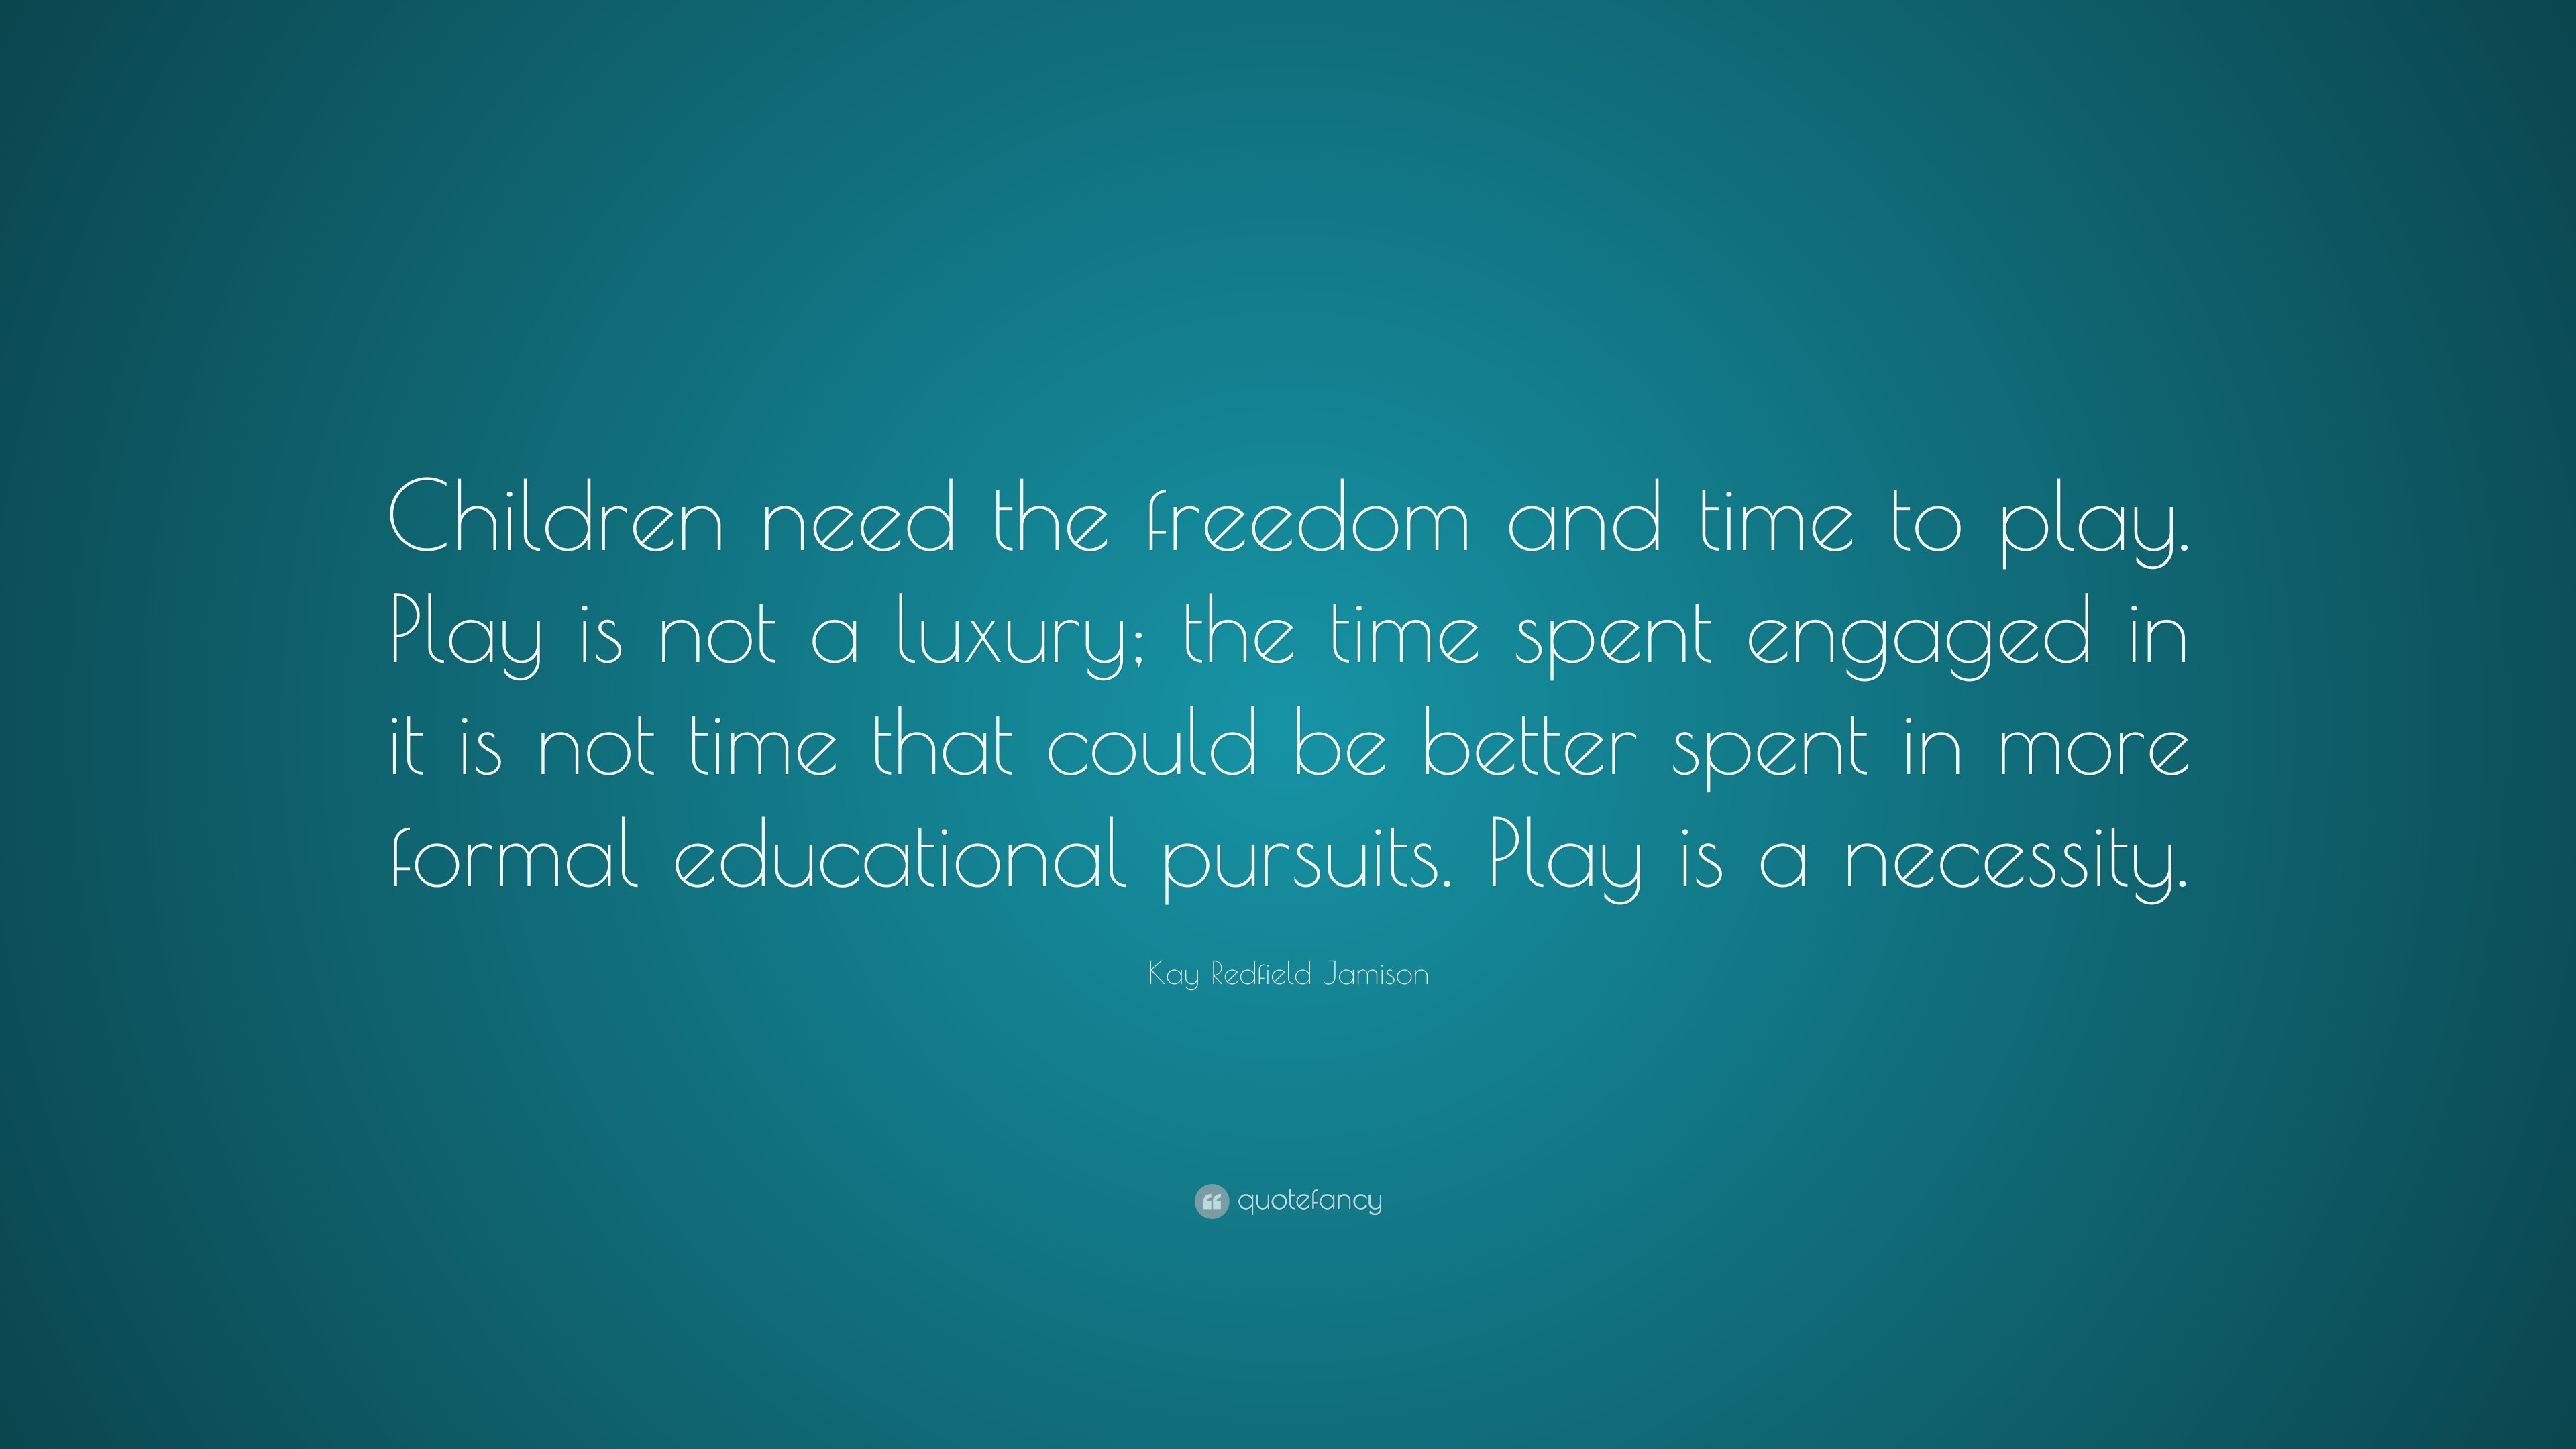 Kay Redfield Jamison Quote Children Need The Freedom And Time To Play Play Is Not A Luxury The Time Spent Engaged In It Is Not Time That Could Be 9 Wallpapers Quotefancy